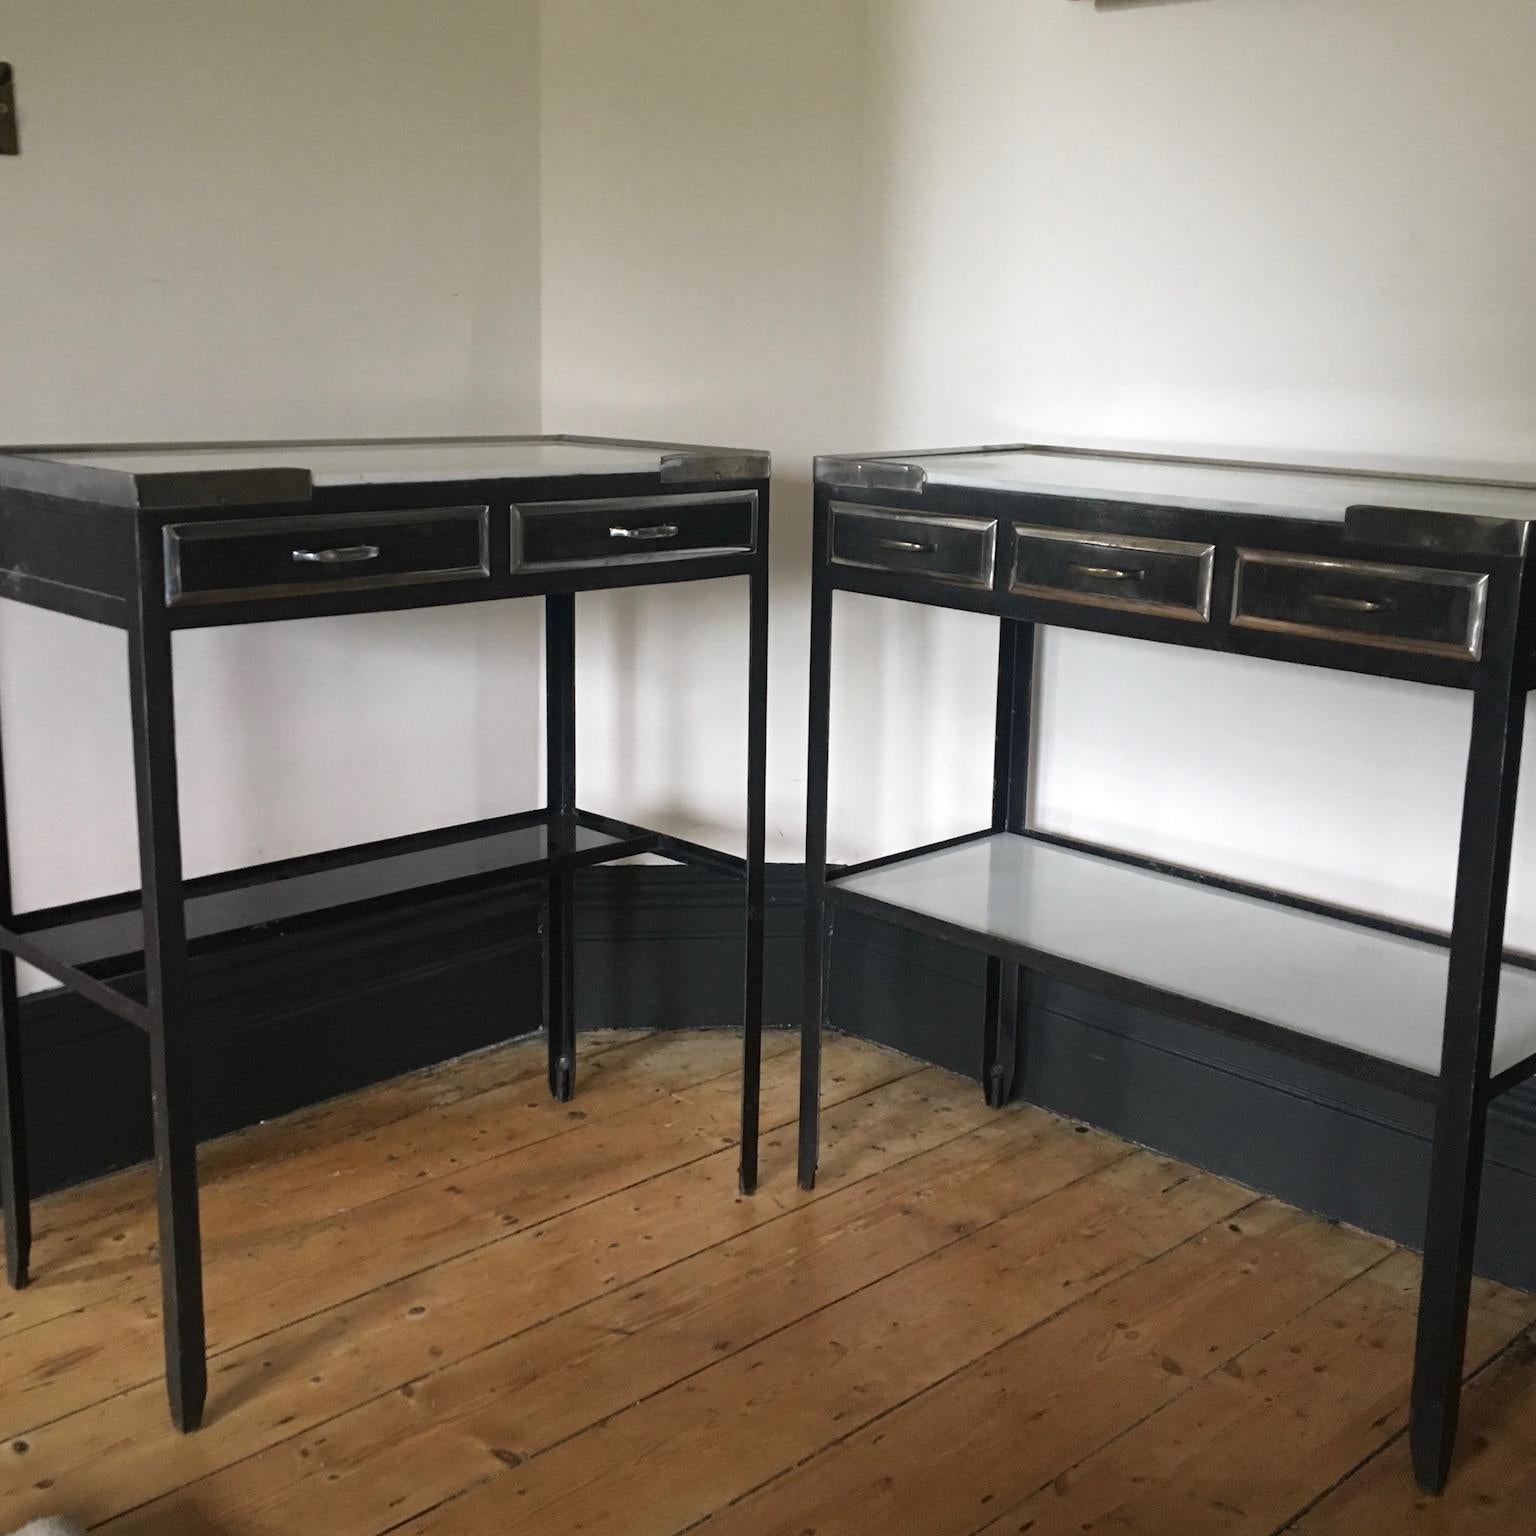 We have two of these medical tables and they are great as a pair even though there are differences in size. Very striking in a bathroom, as console or bedside tables. The one listed here has two glass lined drawers, a milk glass top and black glass